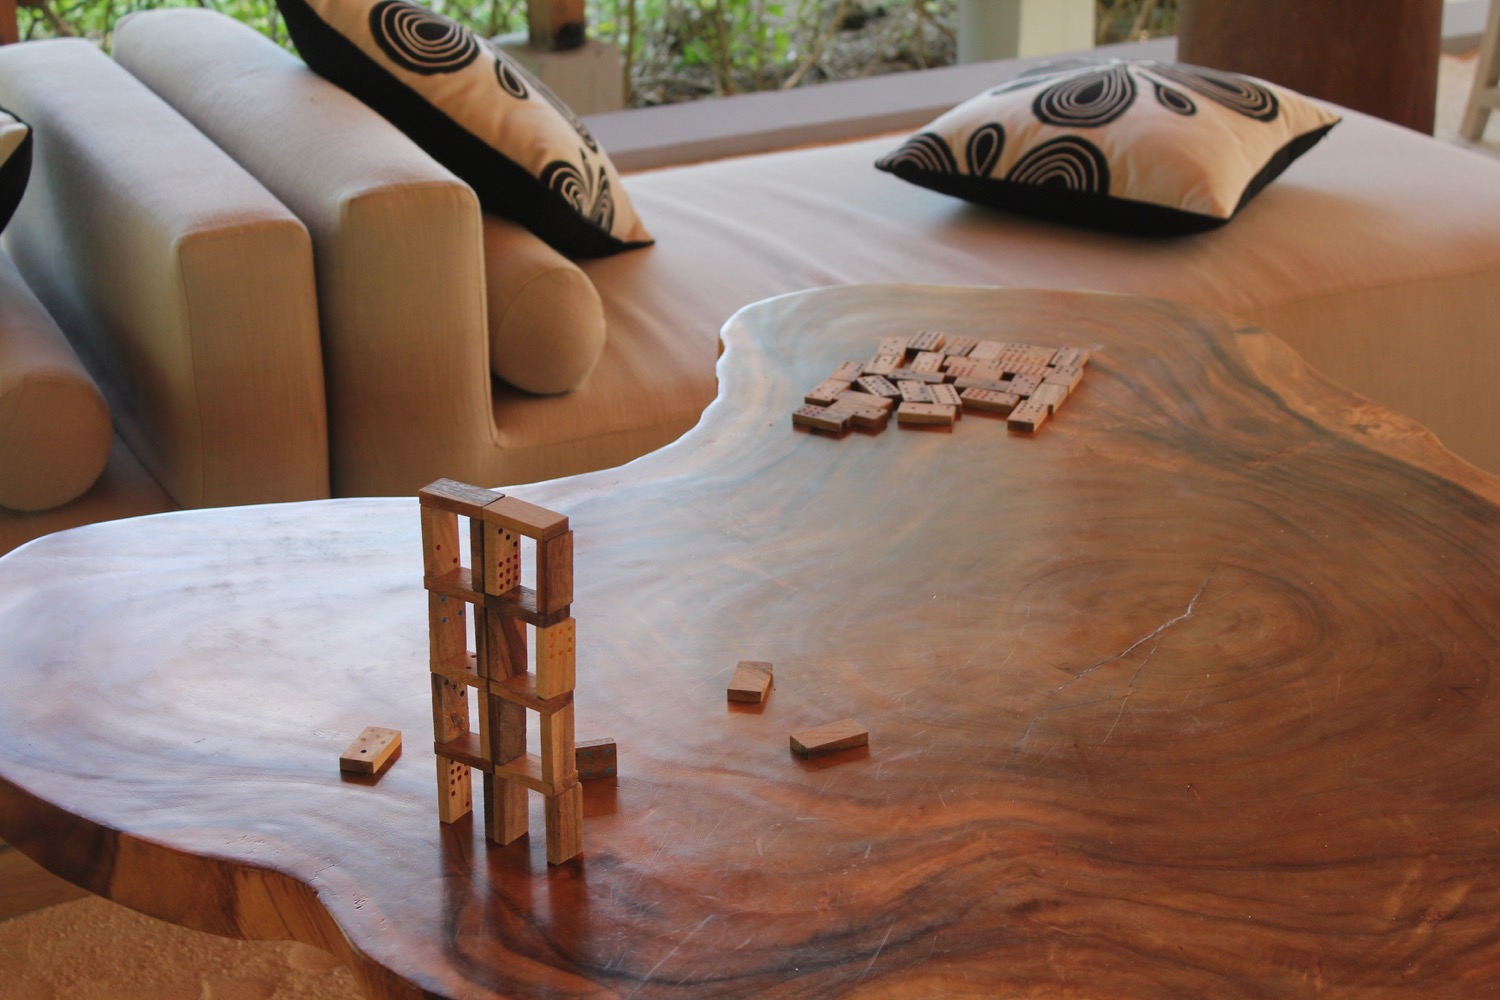 a wooden blocks on a table